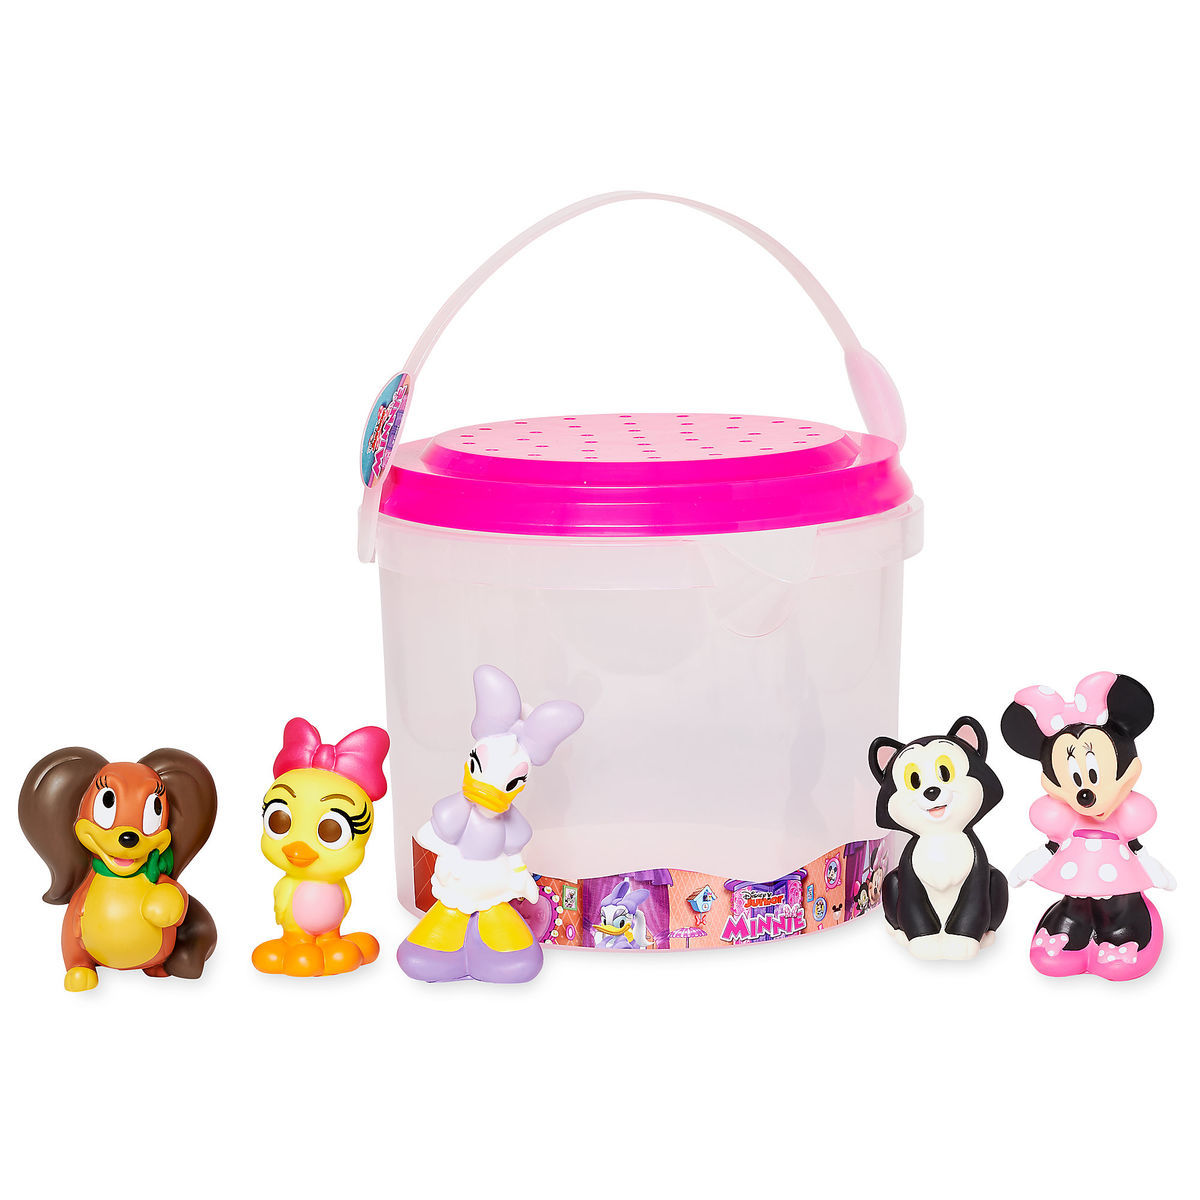 Disney Store Minnie Mouse and Friends Bath Set New with Case